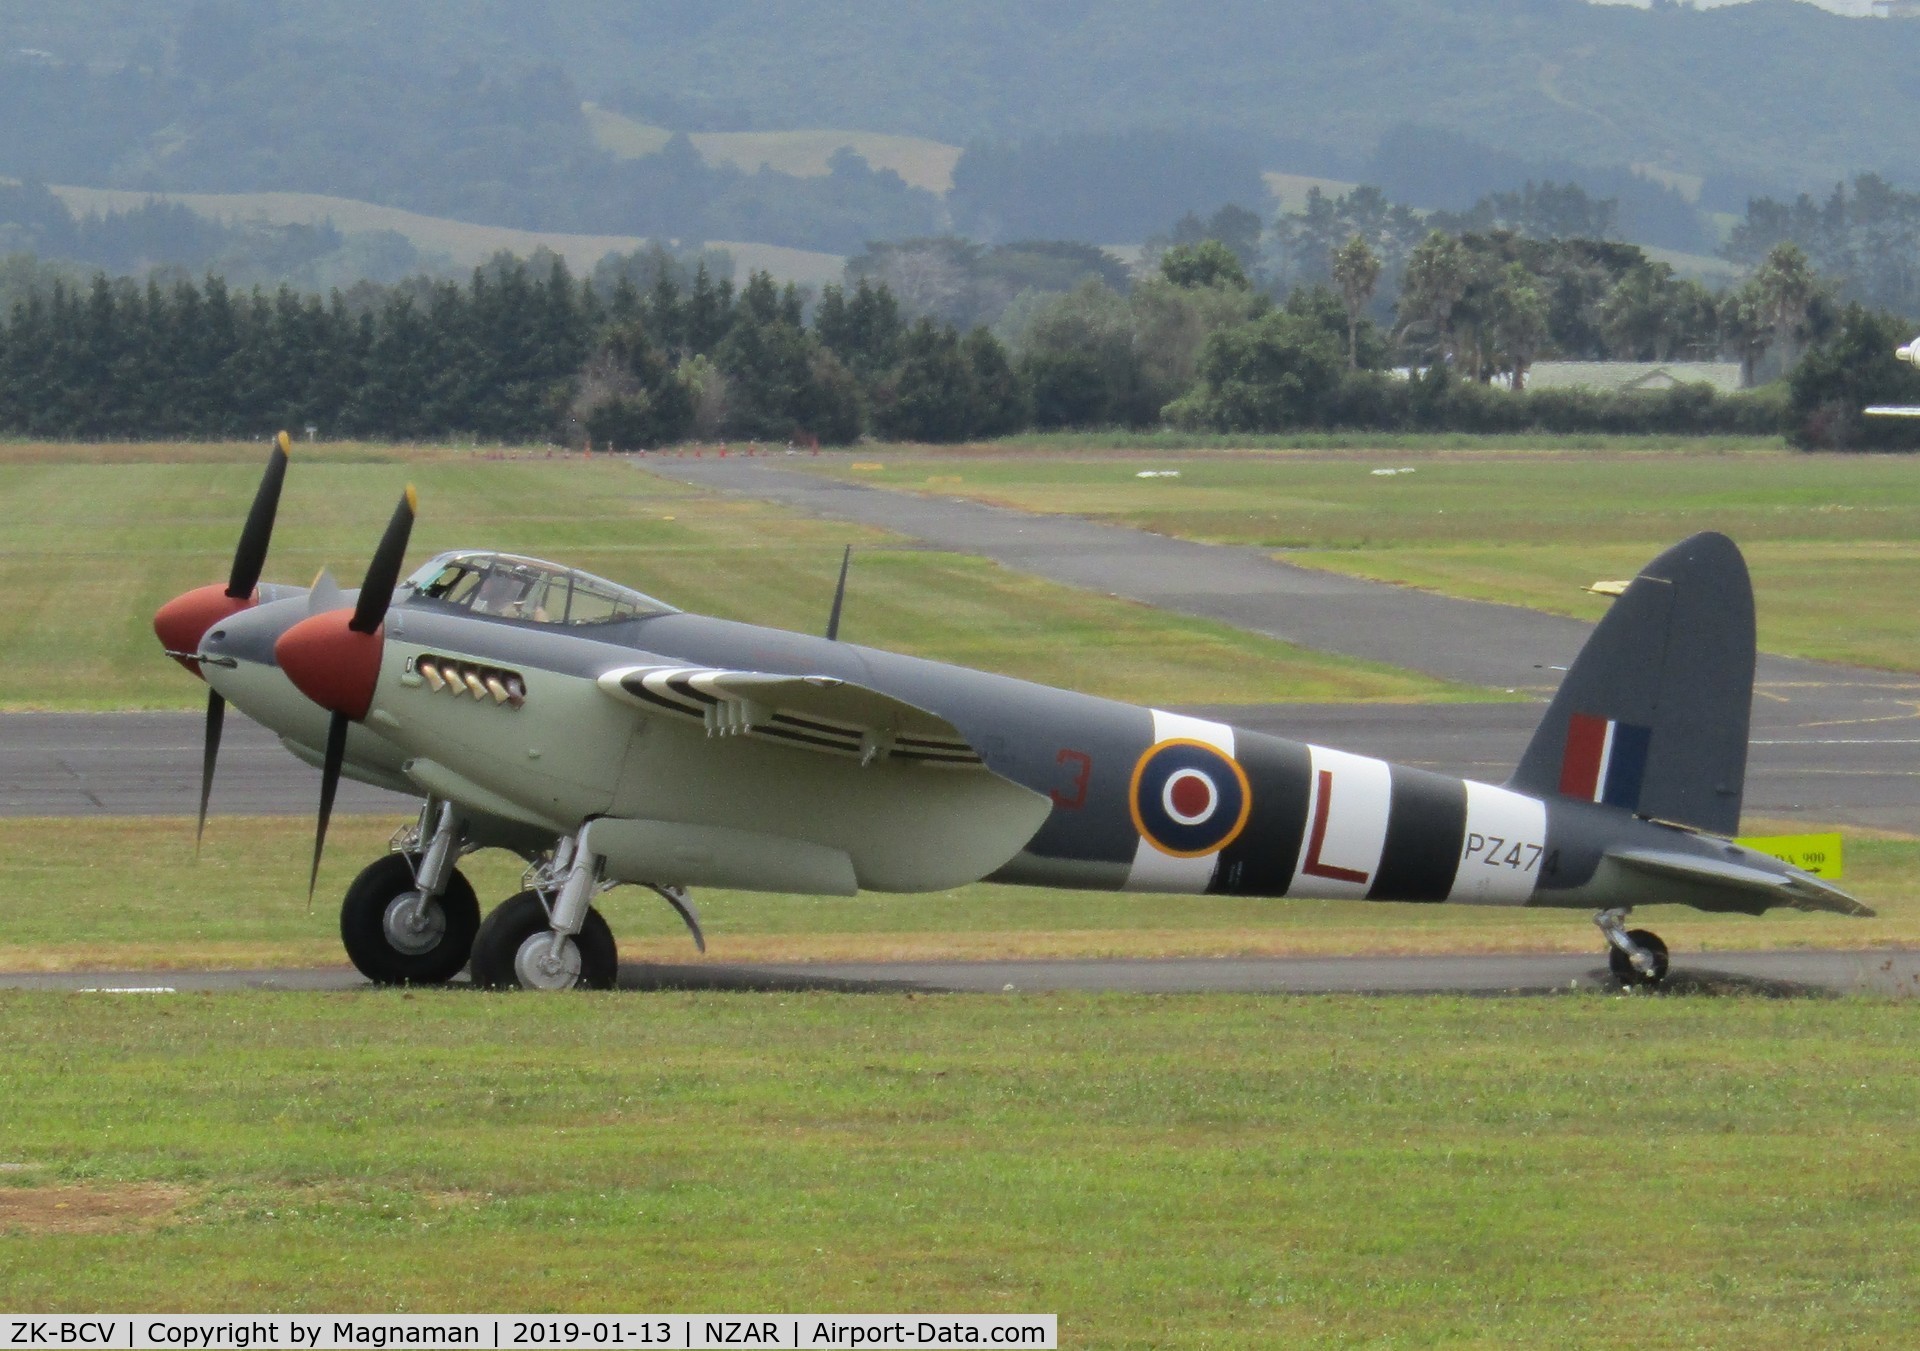 ZK-BCV, 1945 De Havilland DH.98 Mosquito FB.VI C/N NZ2384/PZ474, On only its second flight post restoration - now on its way to USA